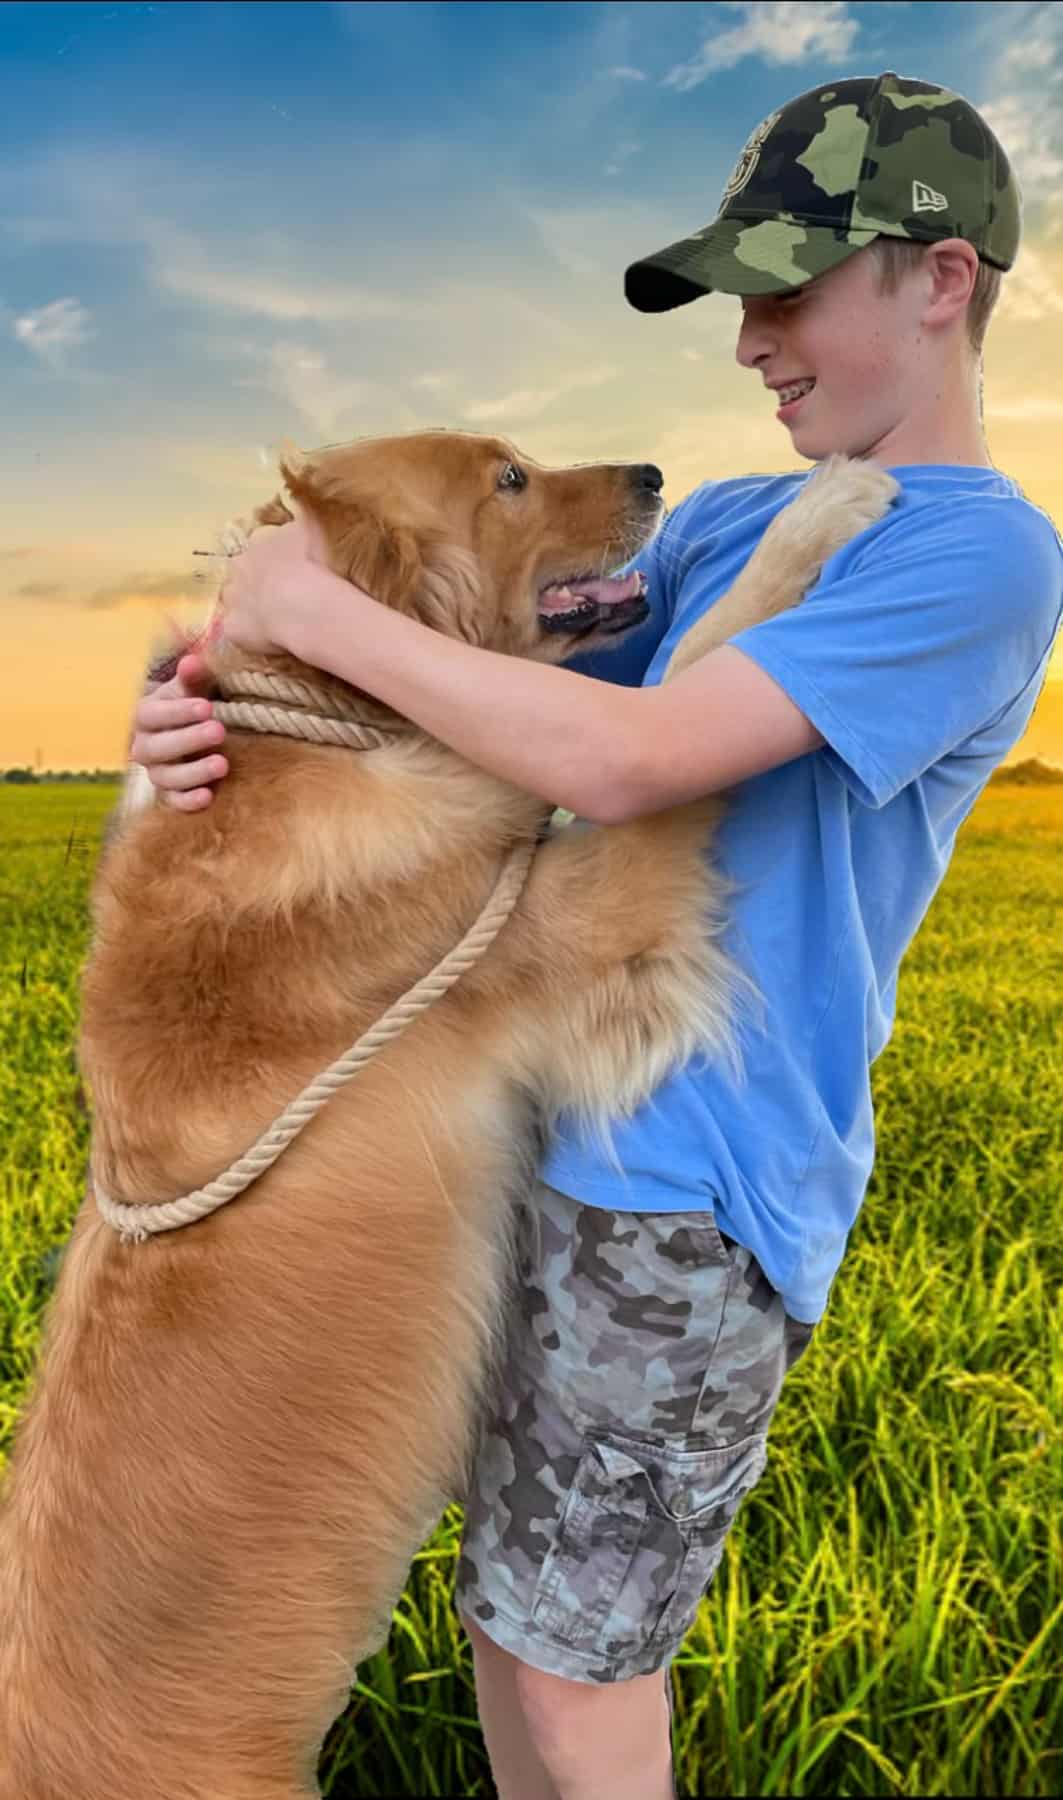 a teen in a camo hat with a dog hugging him